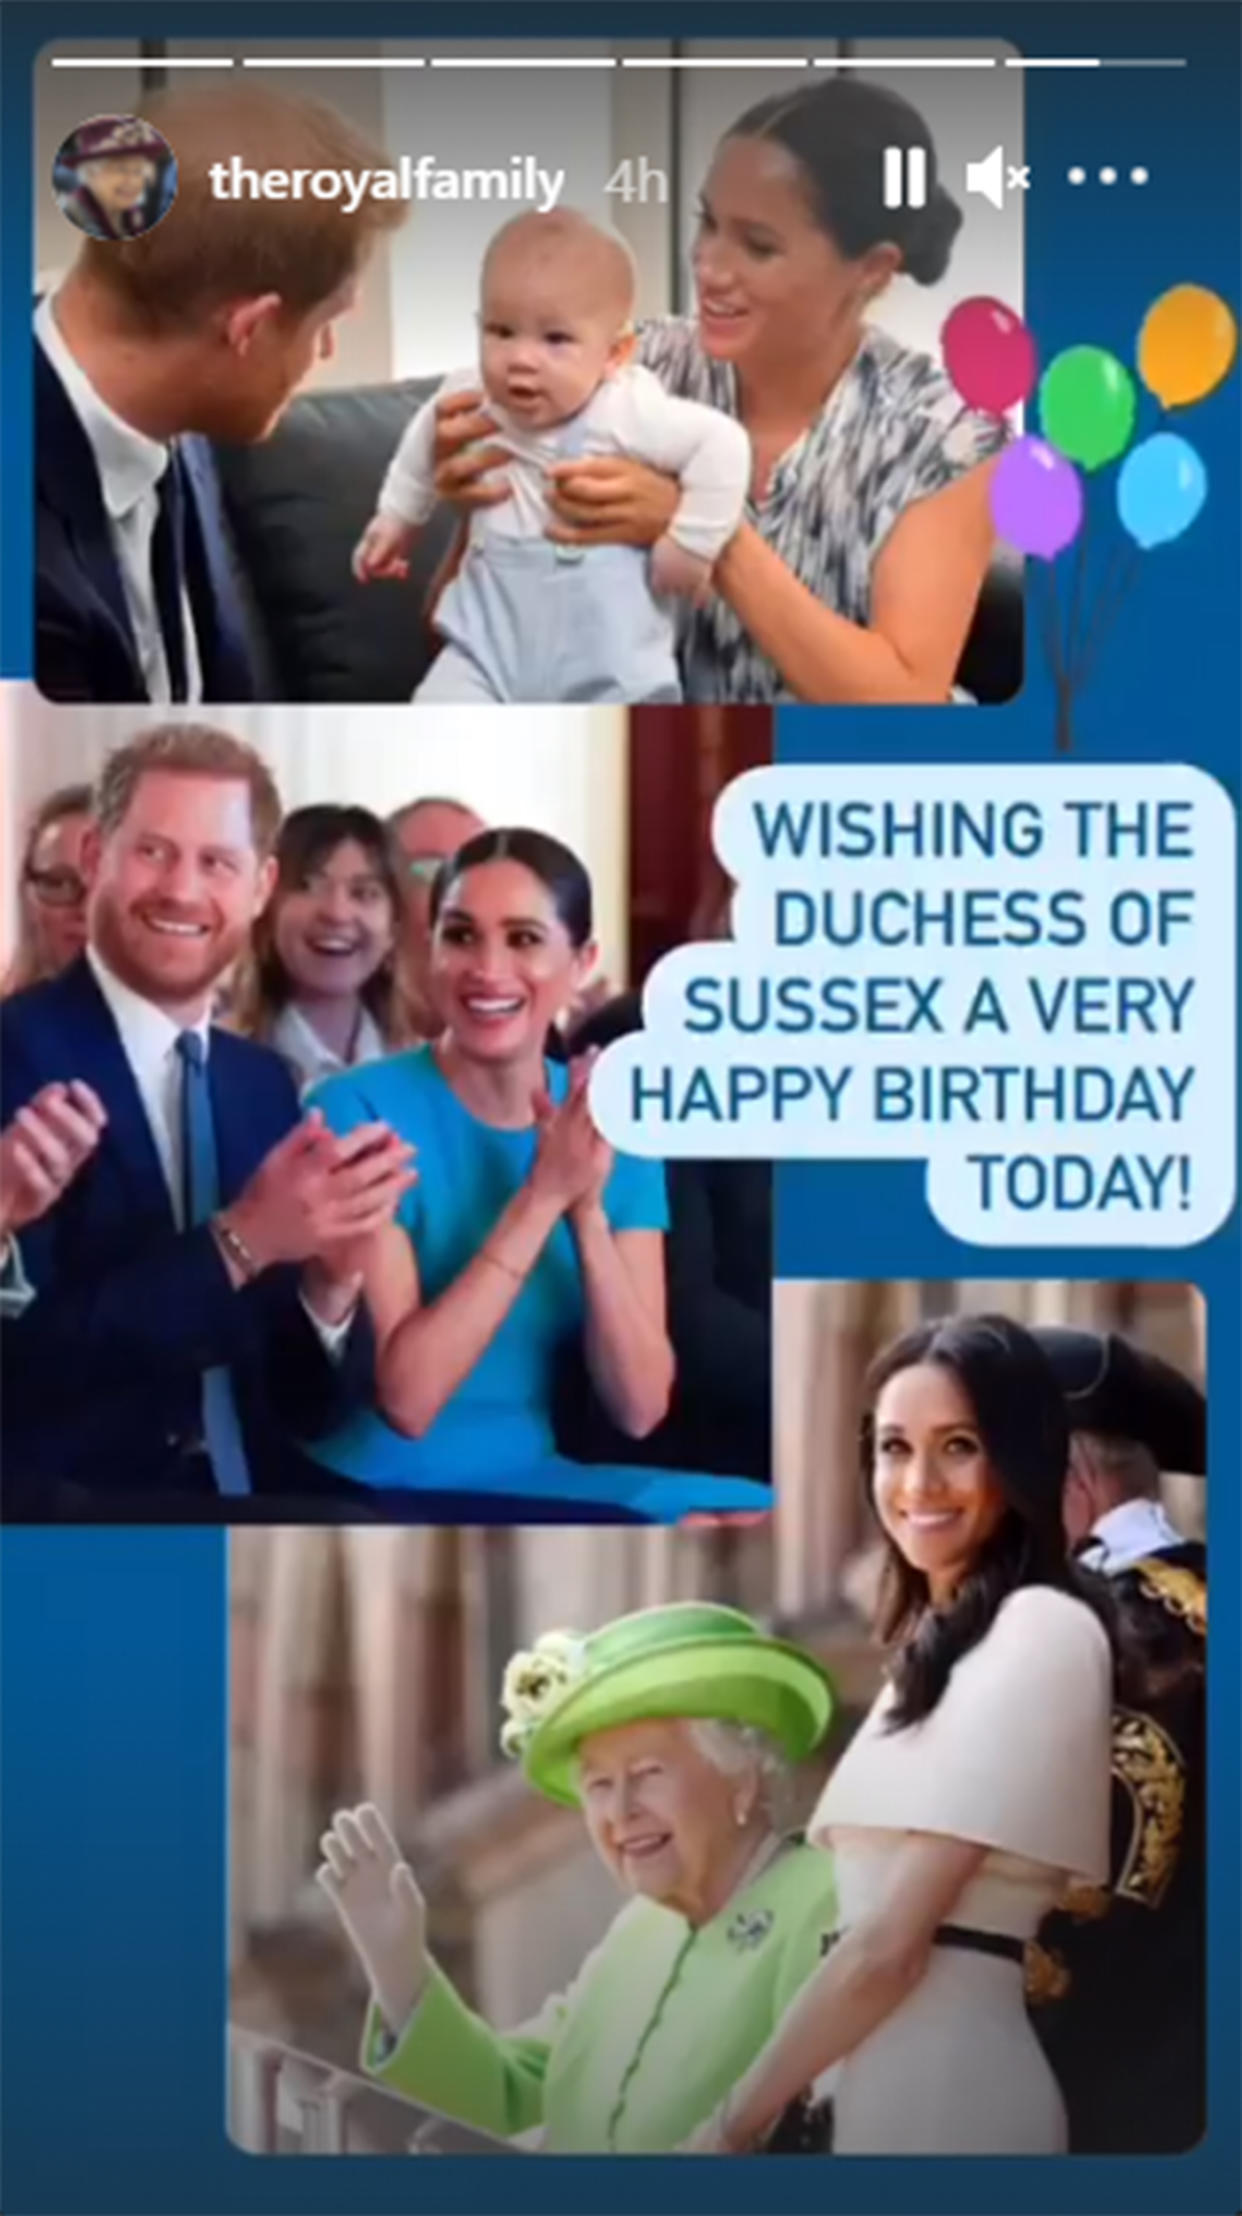 The royal family's official Instagram account also wished the Duchess of Sussex a happy 40th birthday. (theroyalfamily/Instagram)